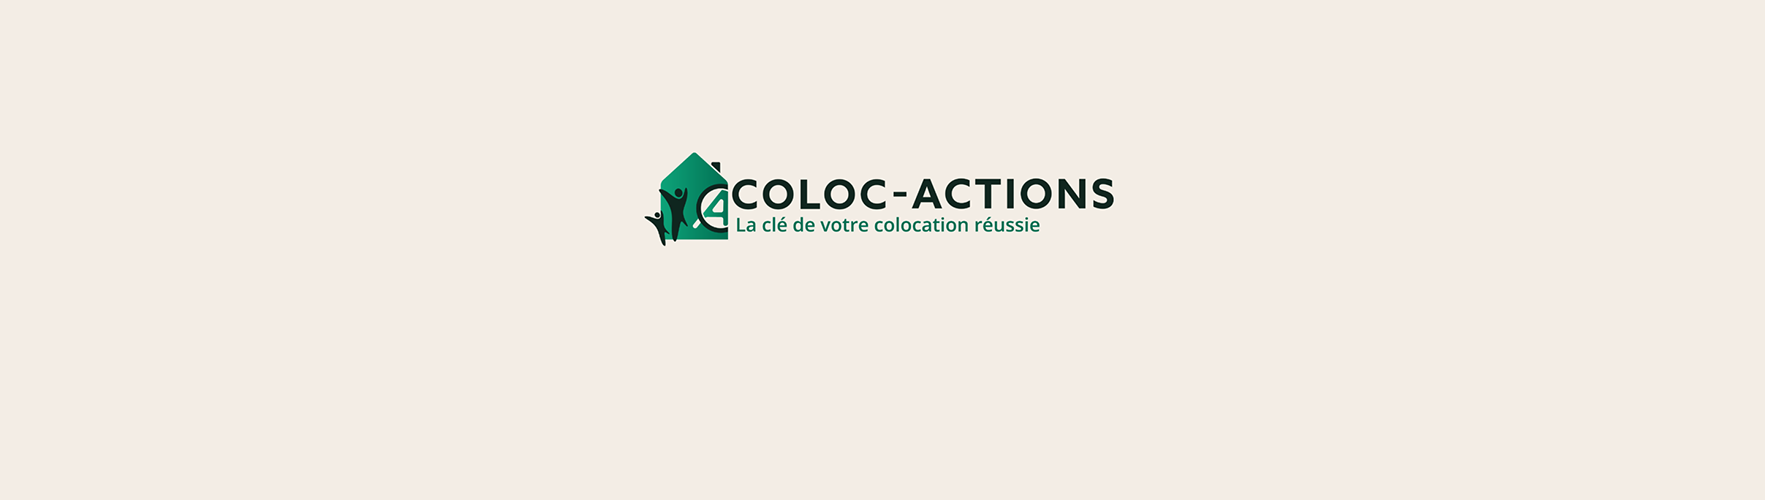 Coloc-actions